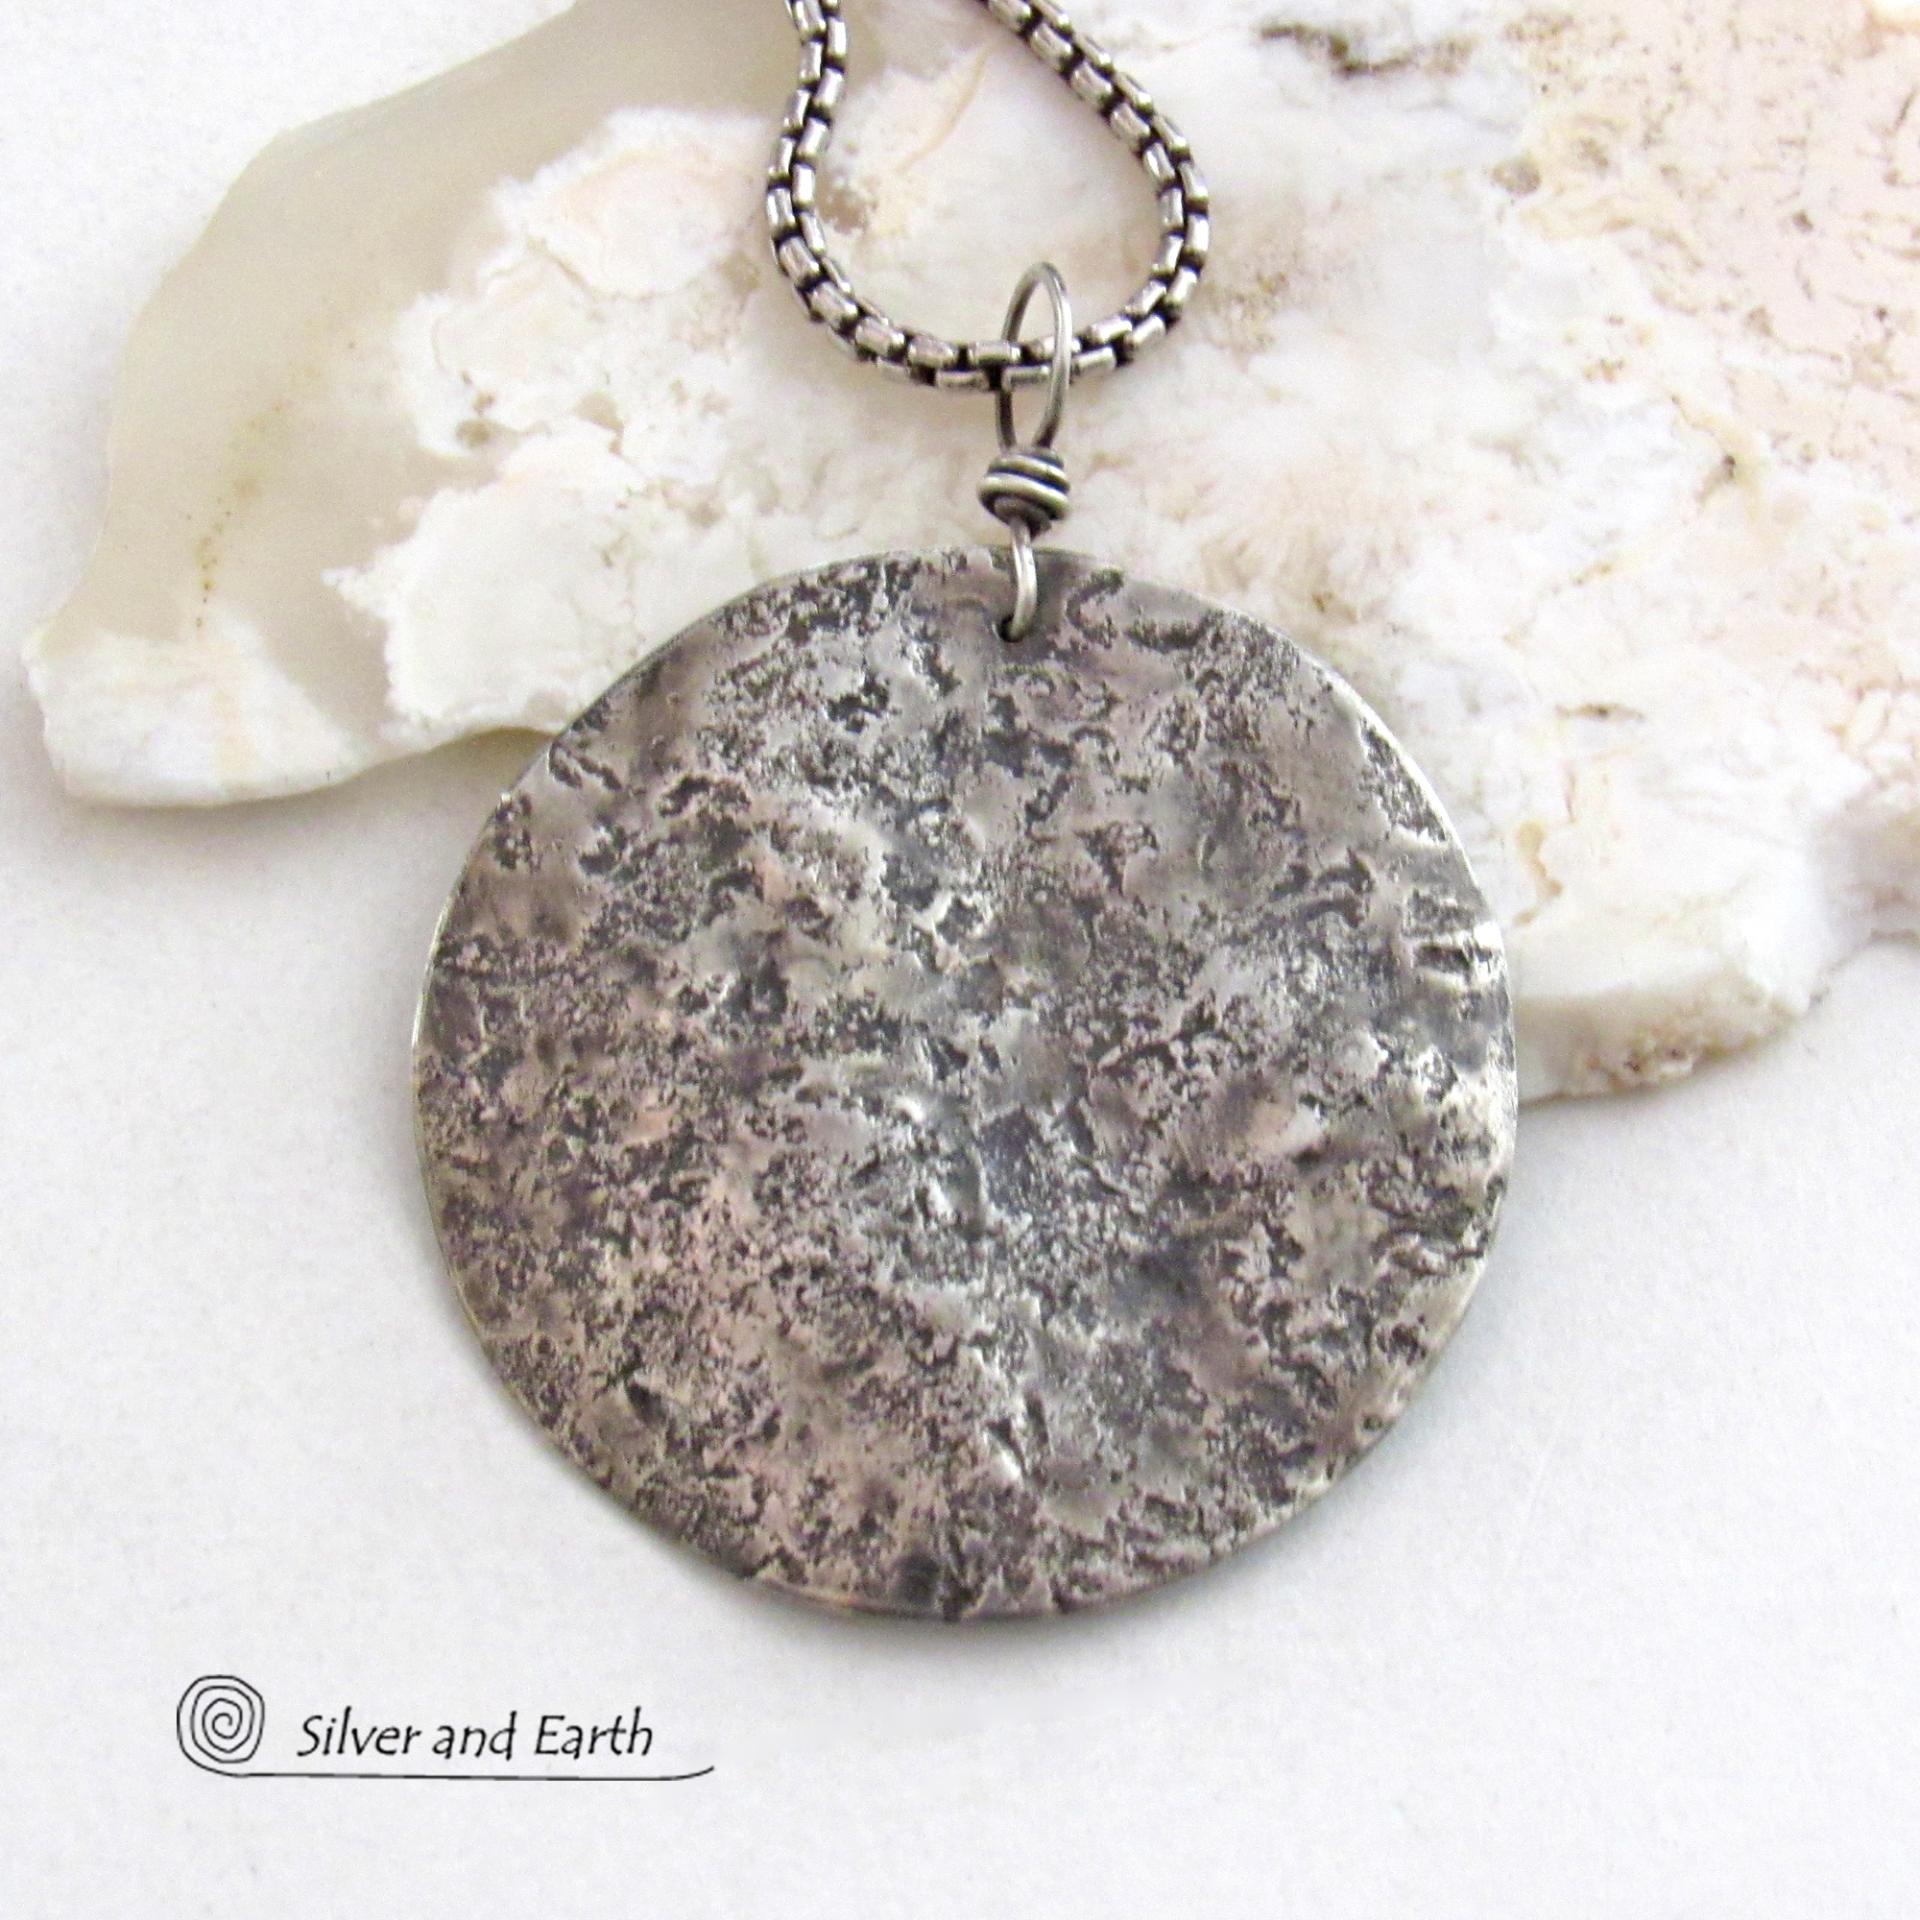 Hammered Sterling Silver Moon Necklace - Handmade Earthy Celestial Jewelry